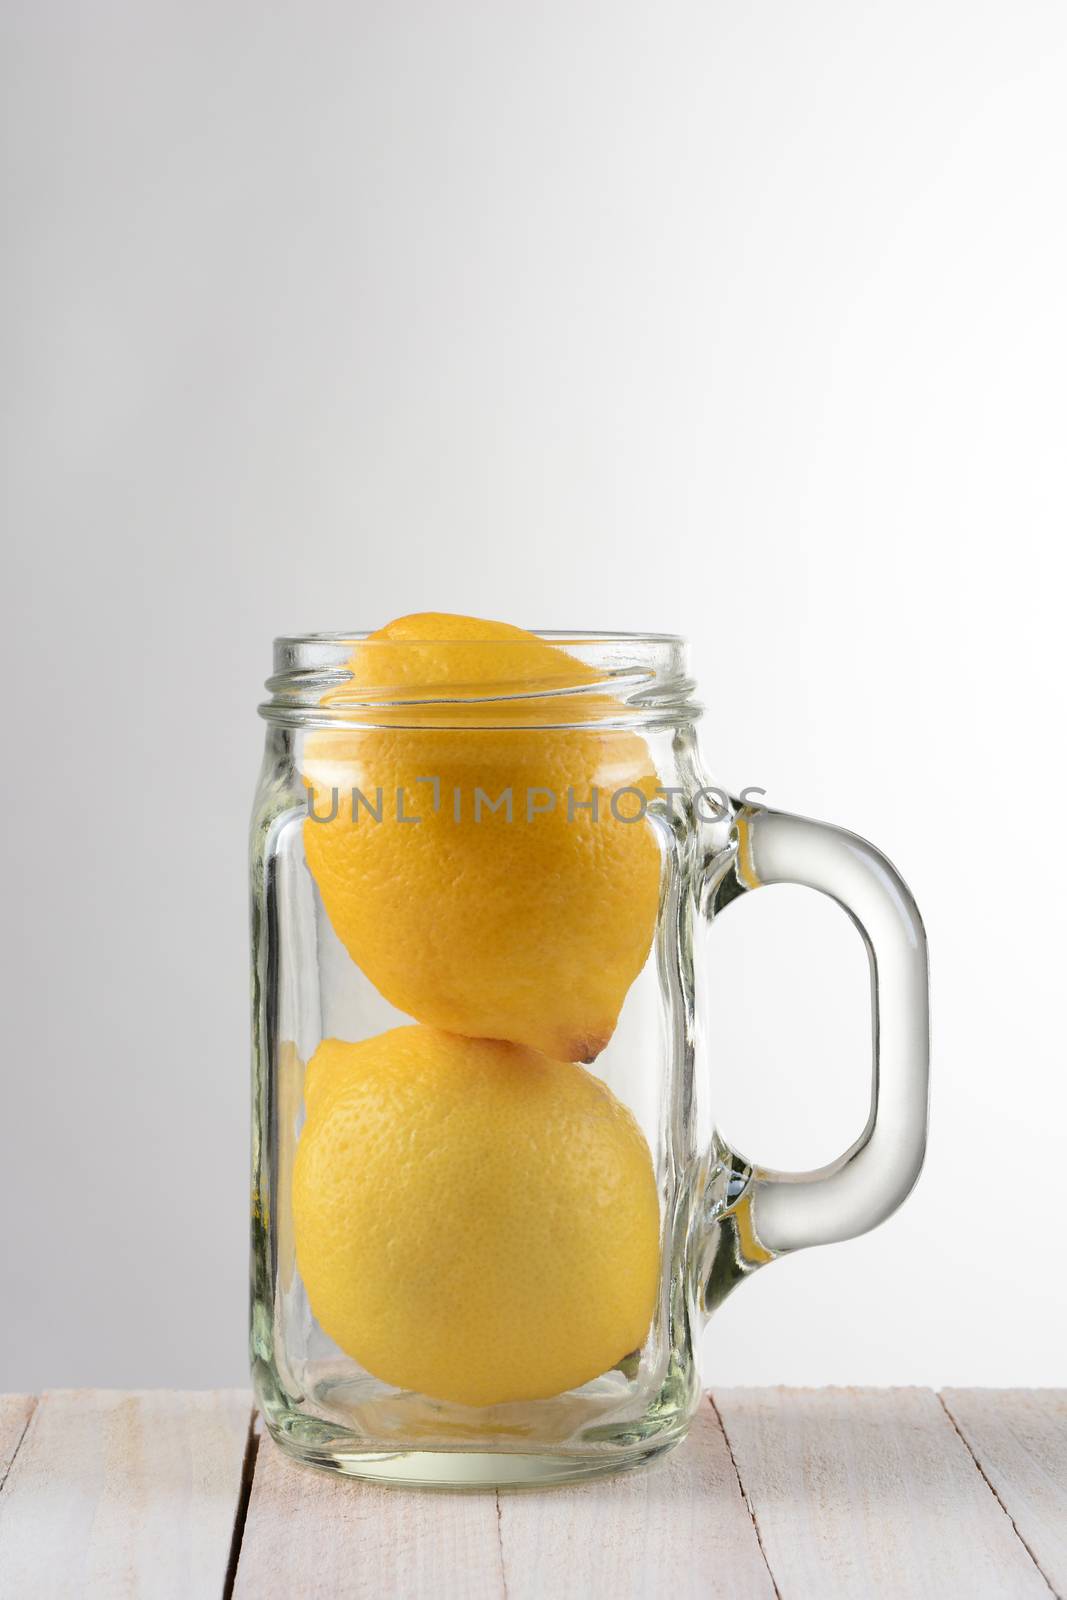 A still life with two lemons in a mason style jar with handle. The glass is on a rustic white wood table against a light to dark gray background with copy space.